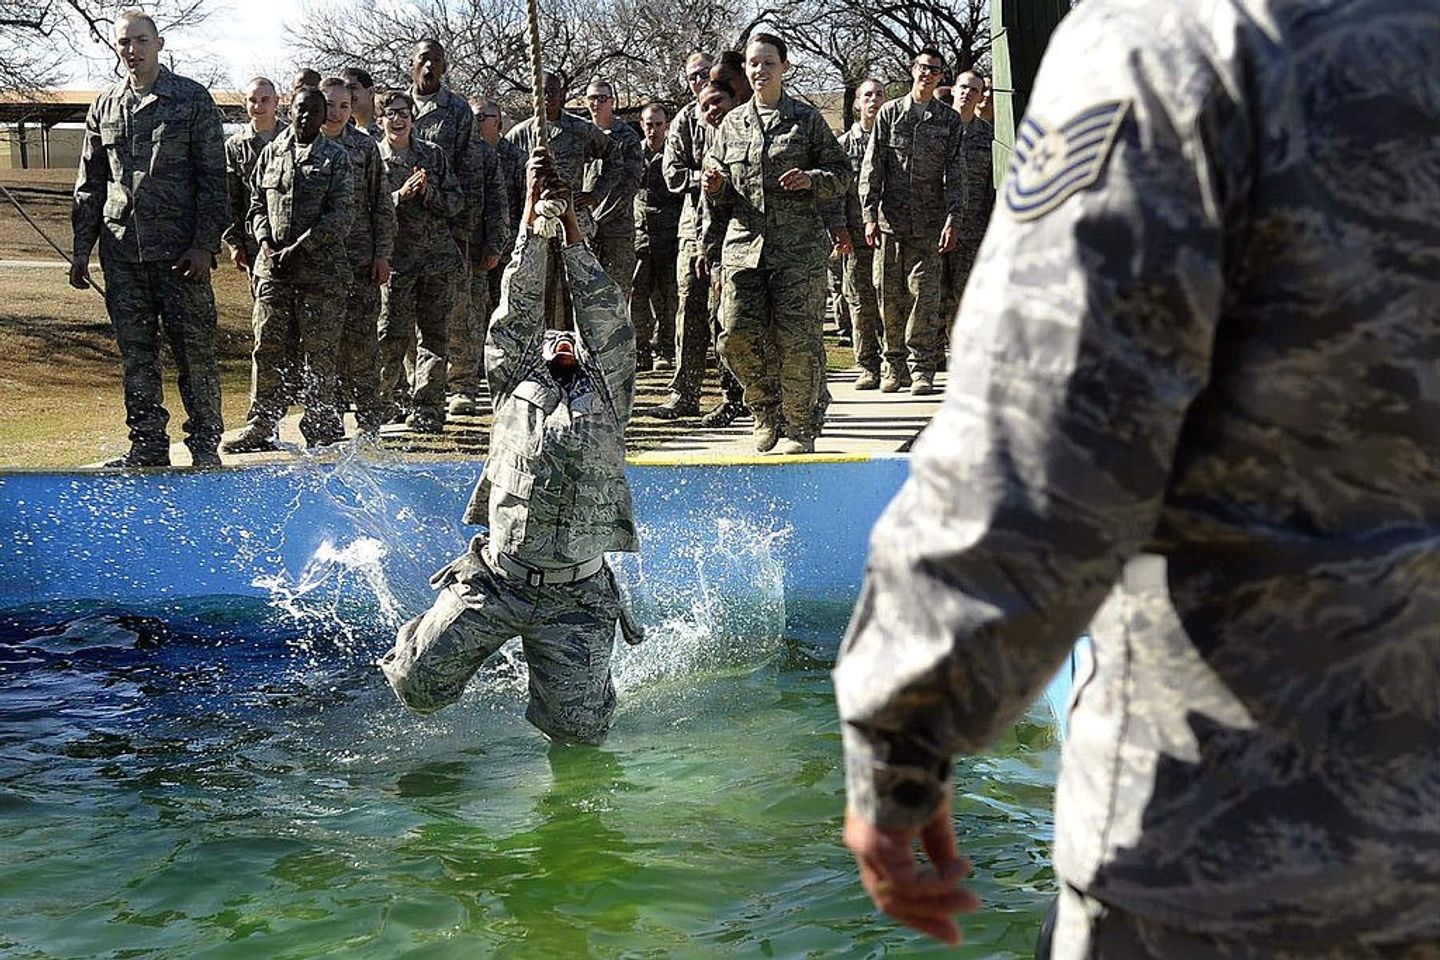 An airman training to become an elite combat controller for air force elite units